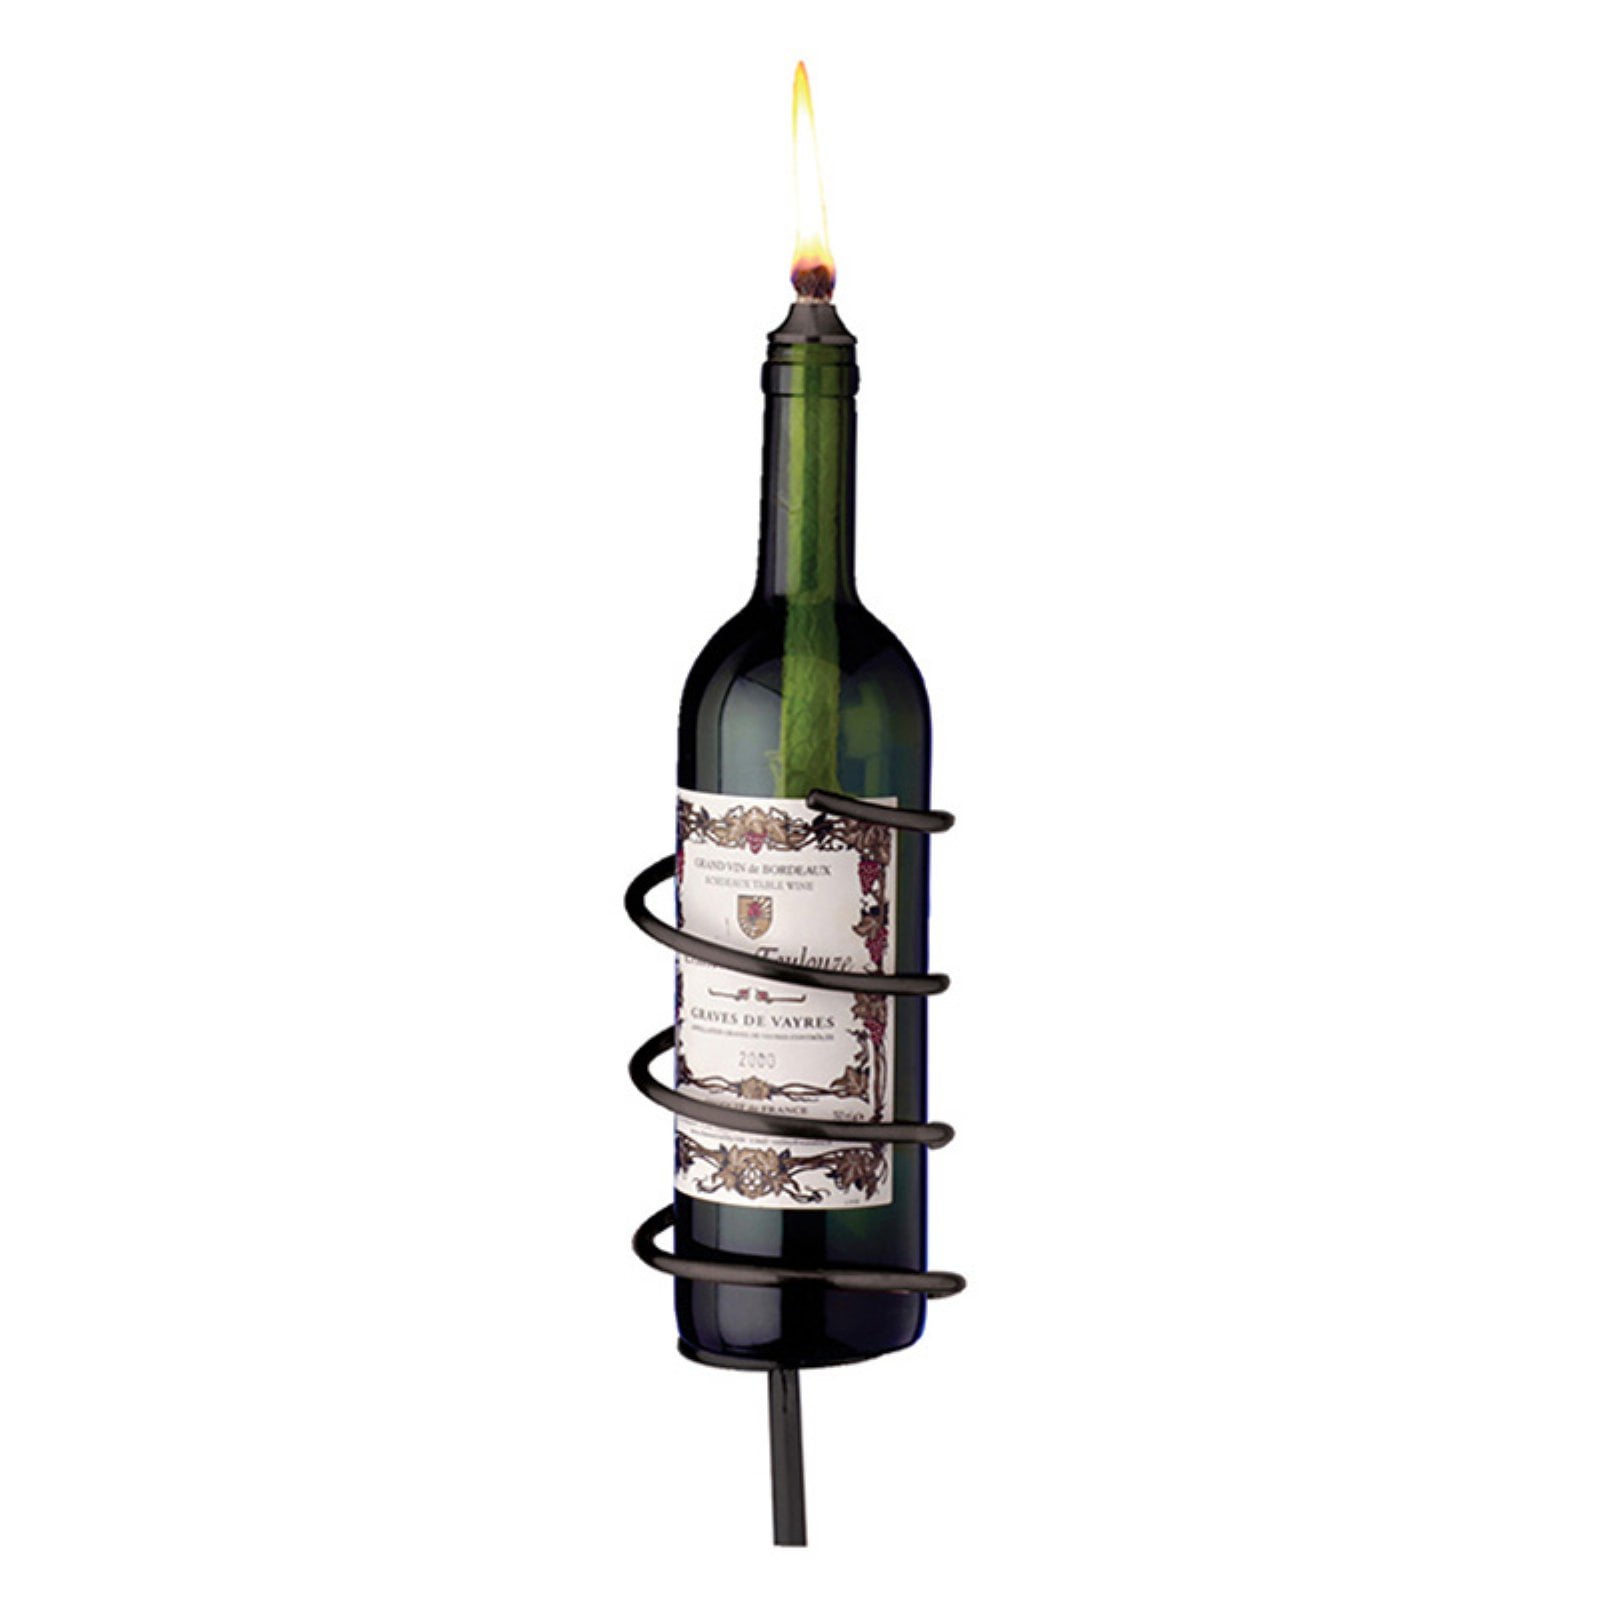 Nuanchu 24 Pieces Wine Bottle Torch Wicks Kit Include 12 Pieces Brass Torch Wick Holders with Washer and 12 Pieces Fiberglass Torch Replacement Wicks for DIY Homemade Torch Indoor Outdoor Decor 